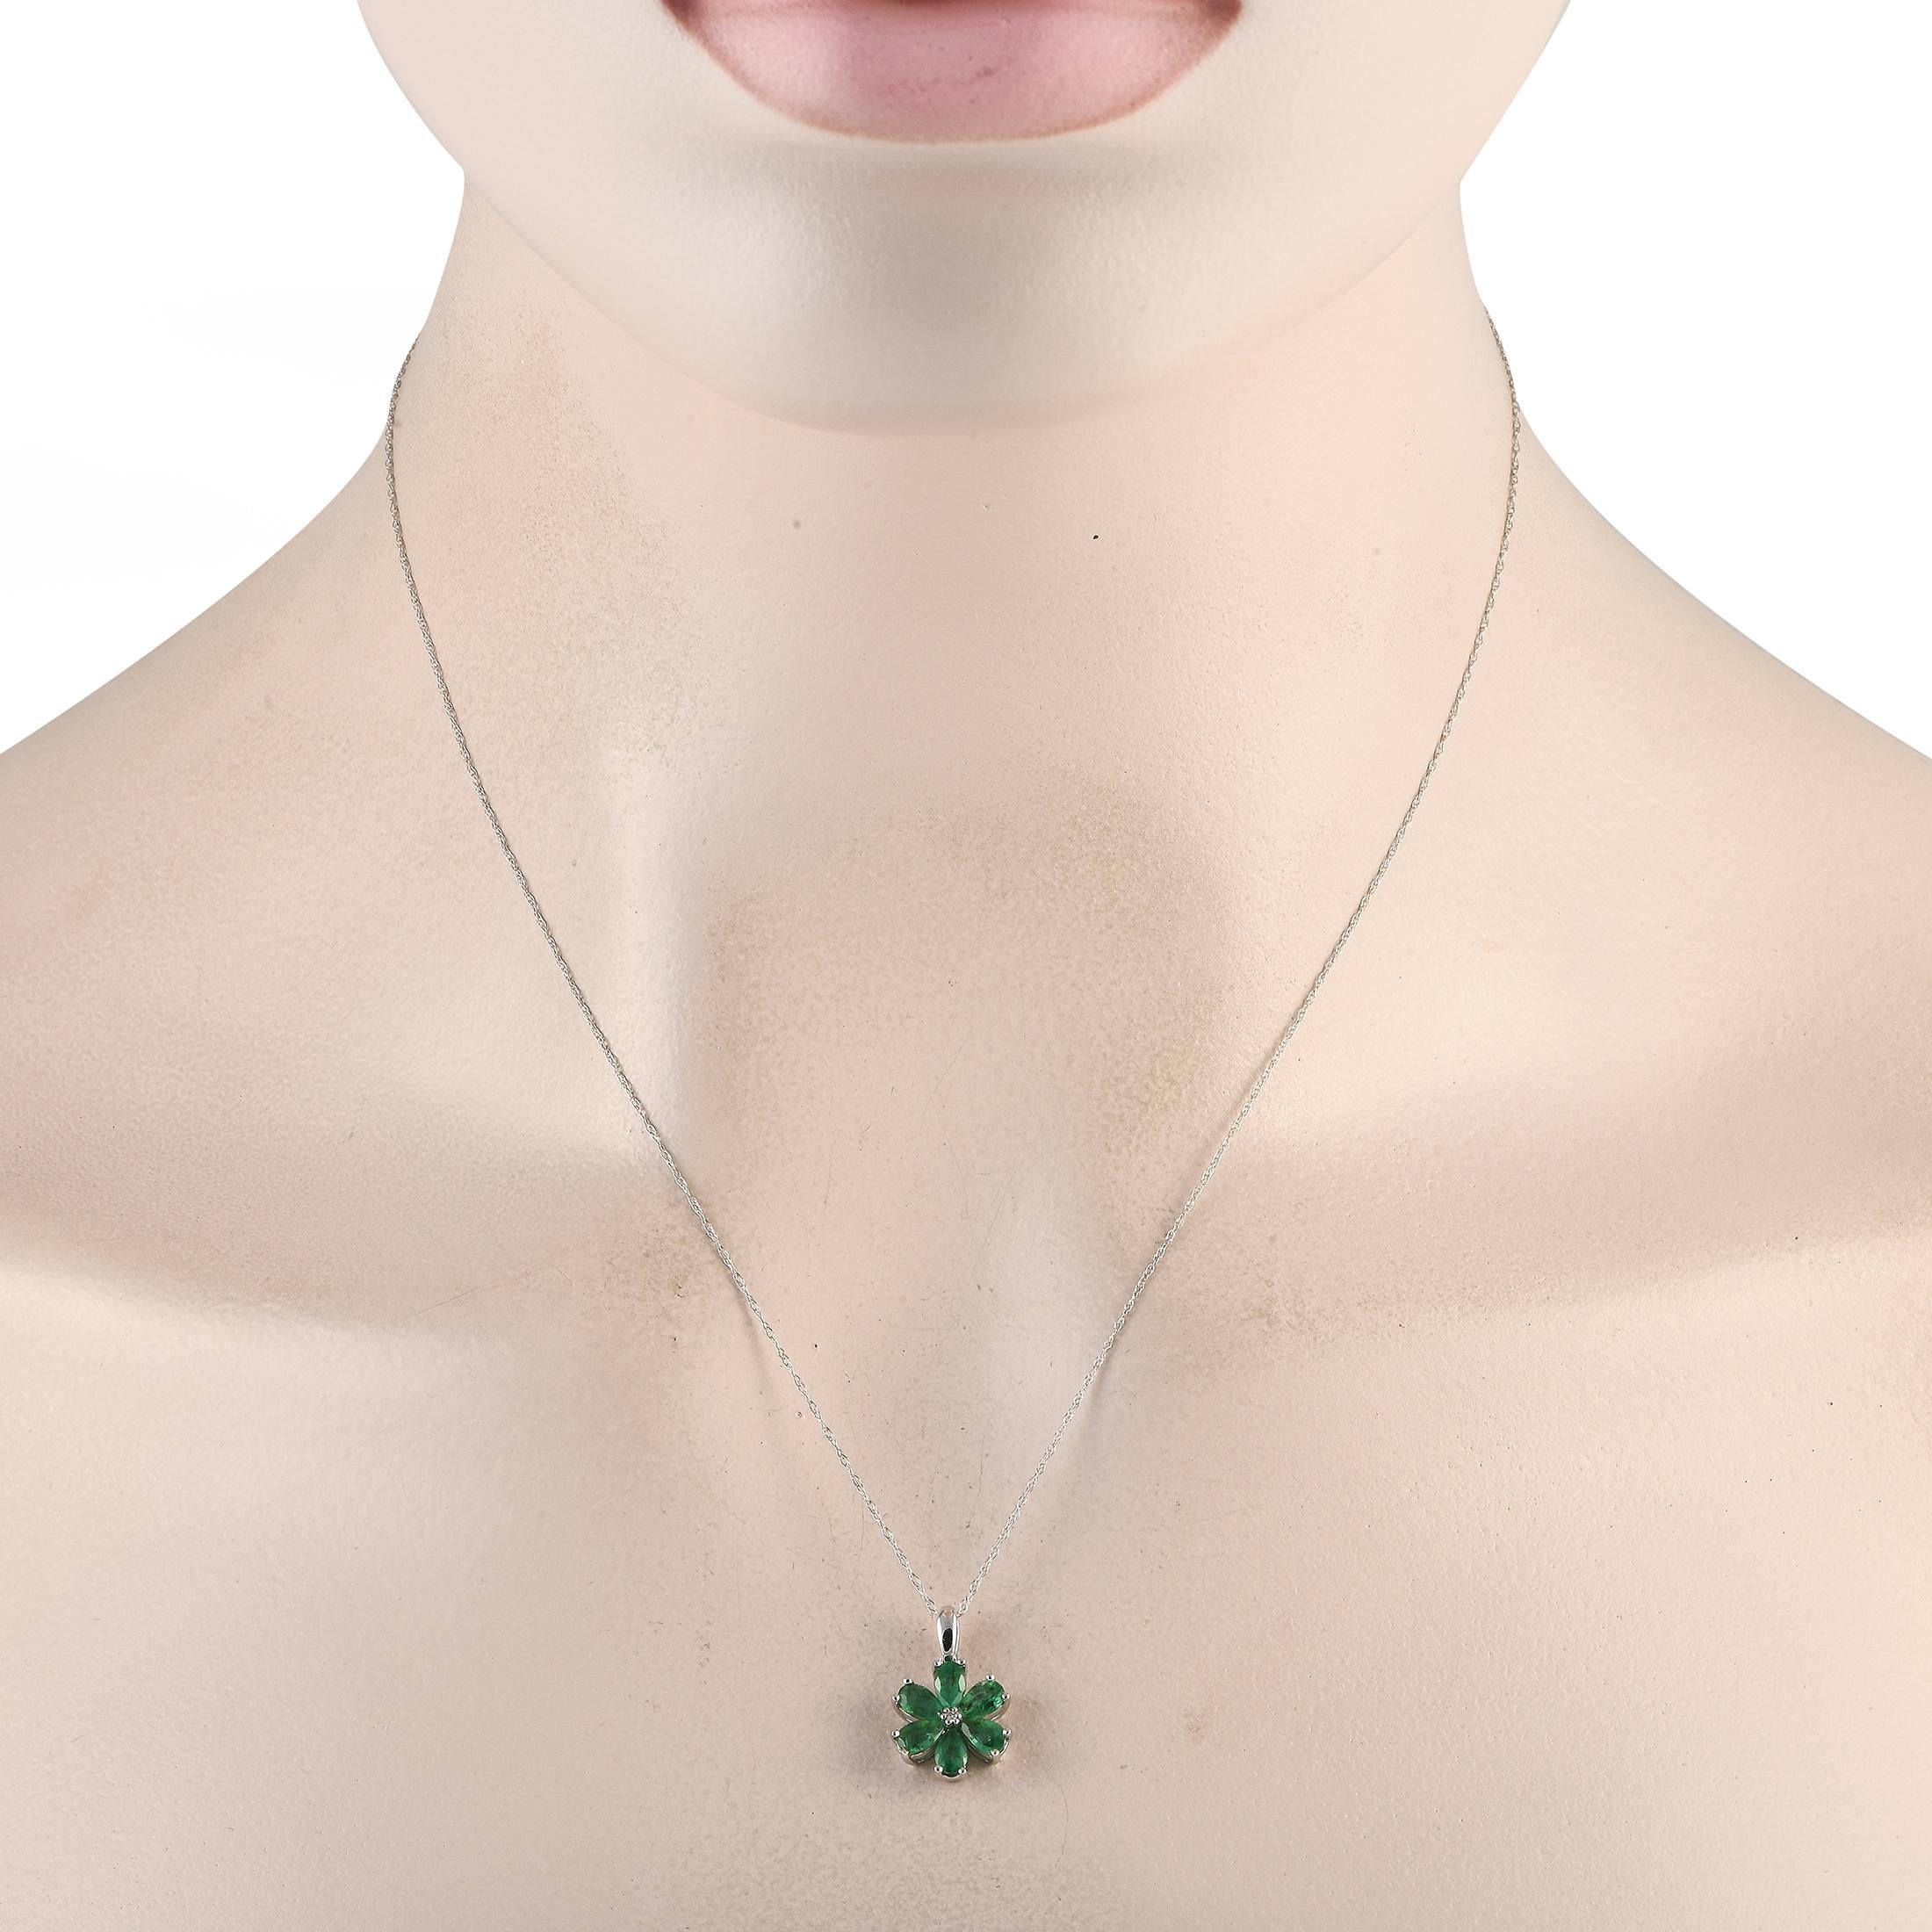 Blooming year-round, this flower necklace is ready to polish your looks no matter the season. The necklace features an 18 cable chain in 14K white gold, holding a 0.75 by 0.50 flower-shaped pendant with emerald petals and a 0.01 ct diamond